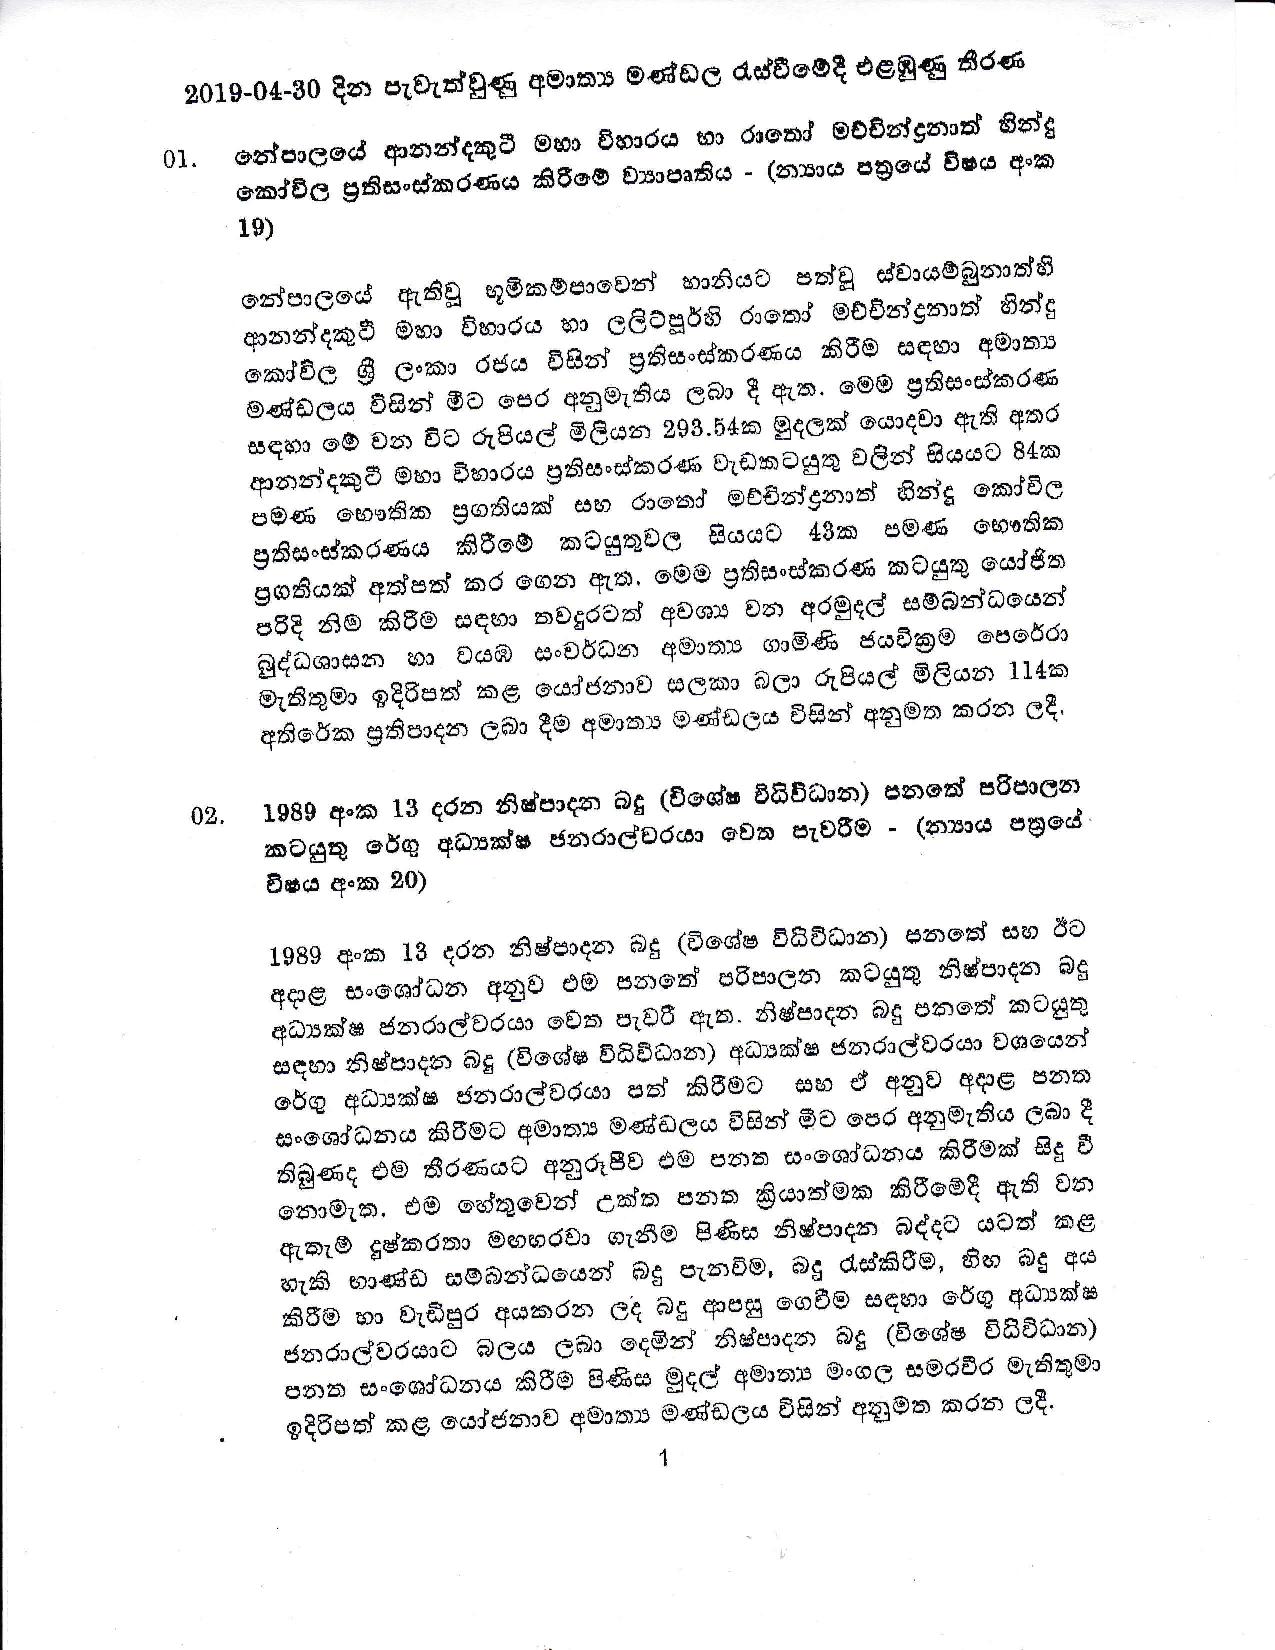 Cabinet Decision on 30.04.2019 page 001